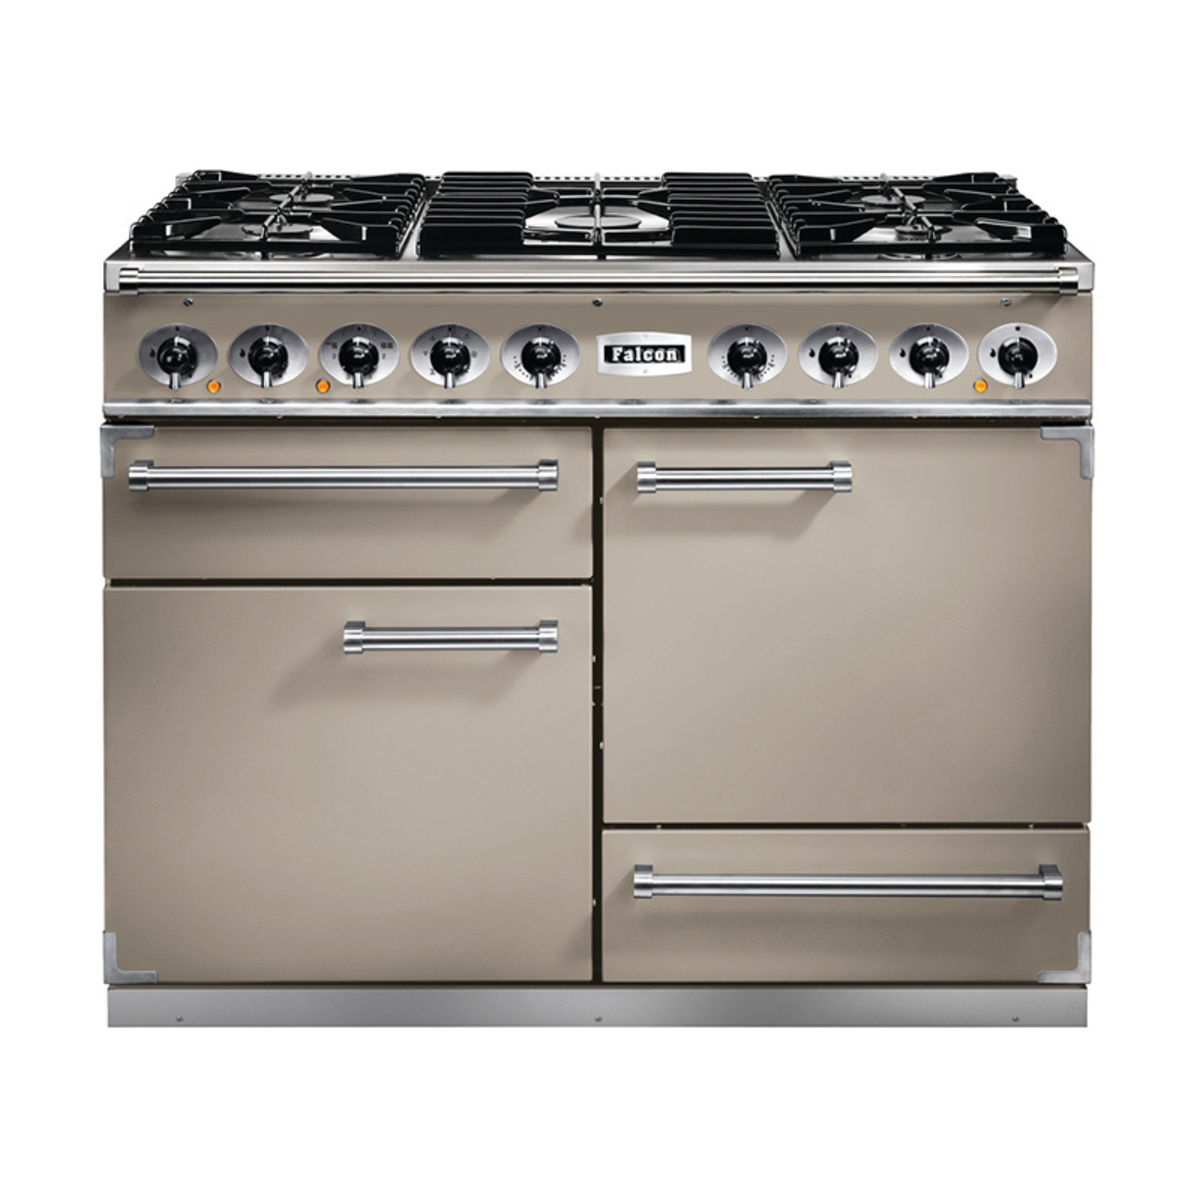 FALCON 115420 (F1092DXDFFN/NM) 1092mm Deluxe Dual Fuel Range Cooker, Fawn/N